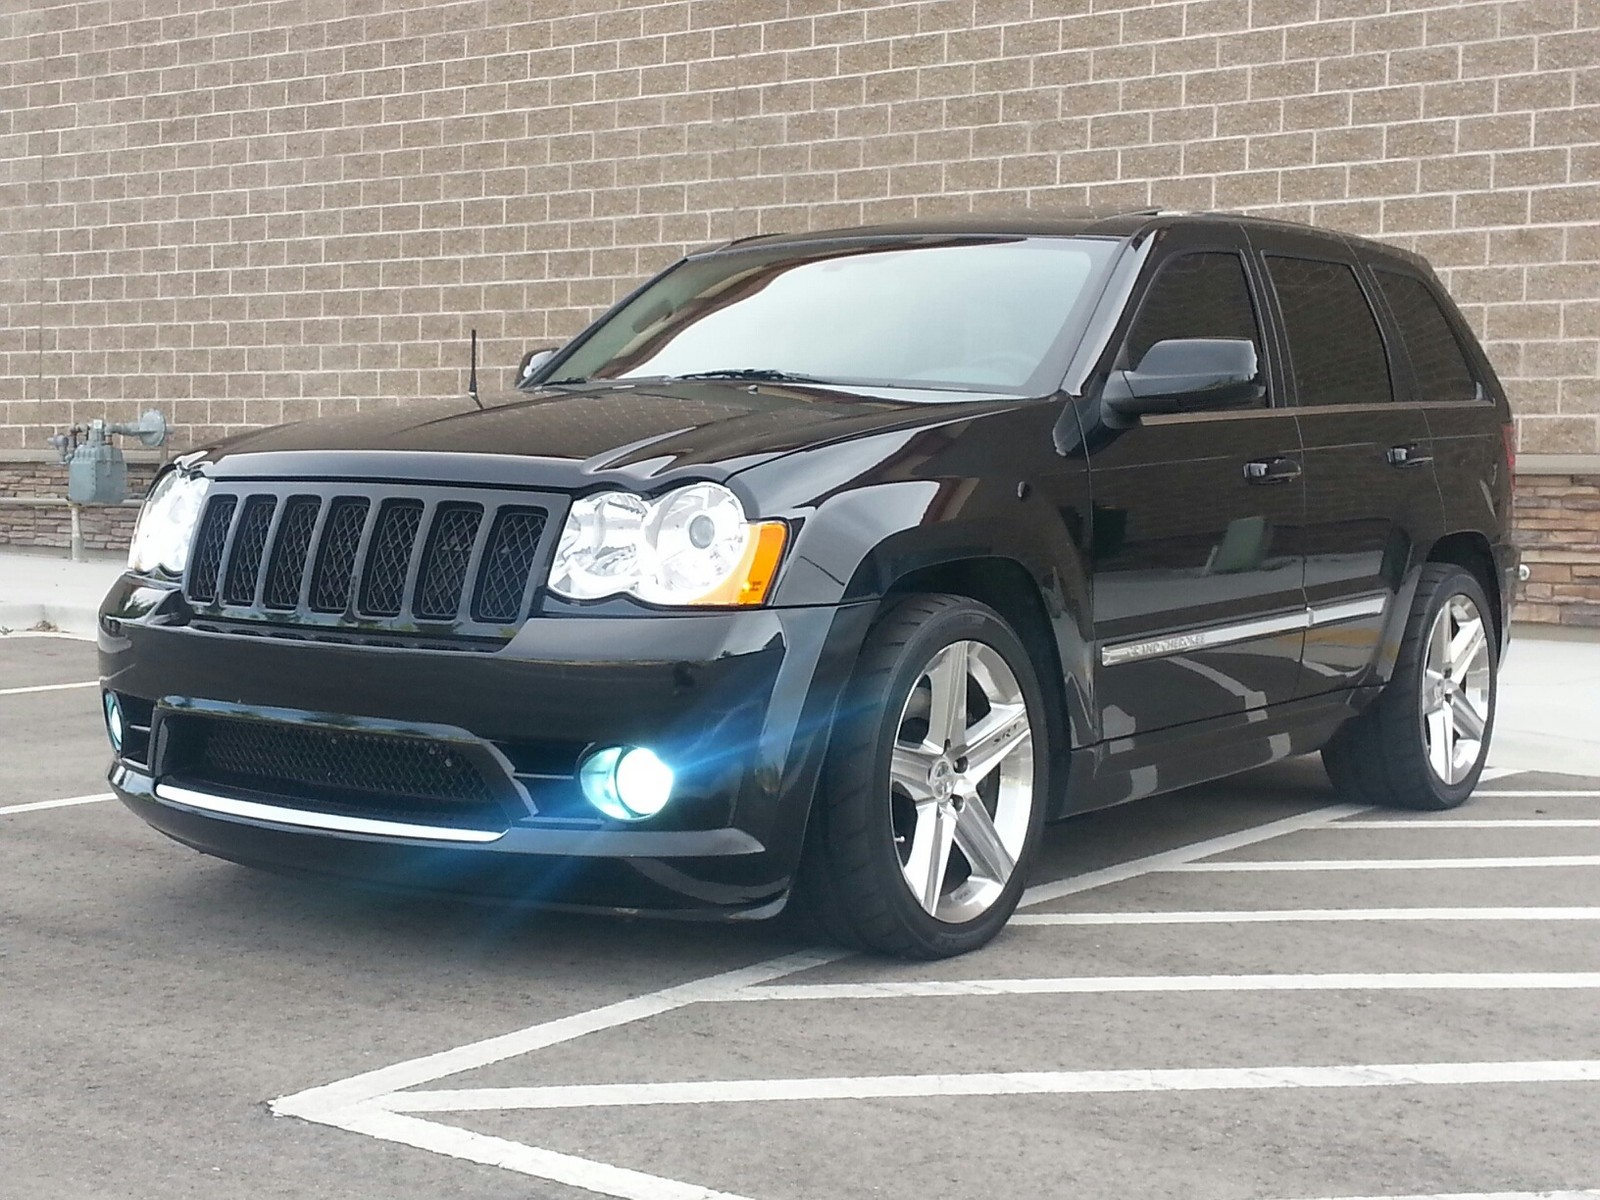 2008 Black Jeep Cherokee SRT8 Magnuson Supercharged picture, mods, upgrades